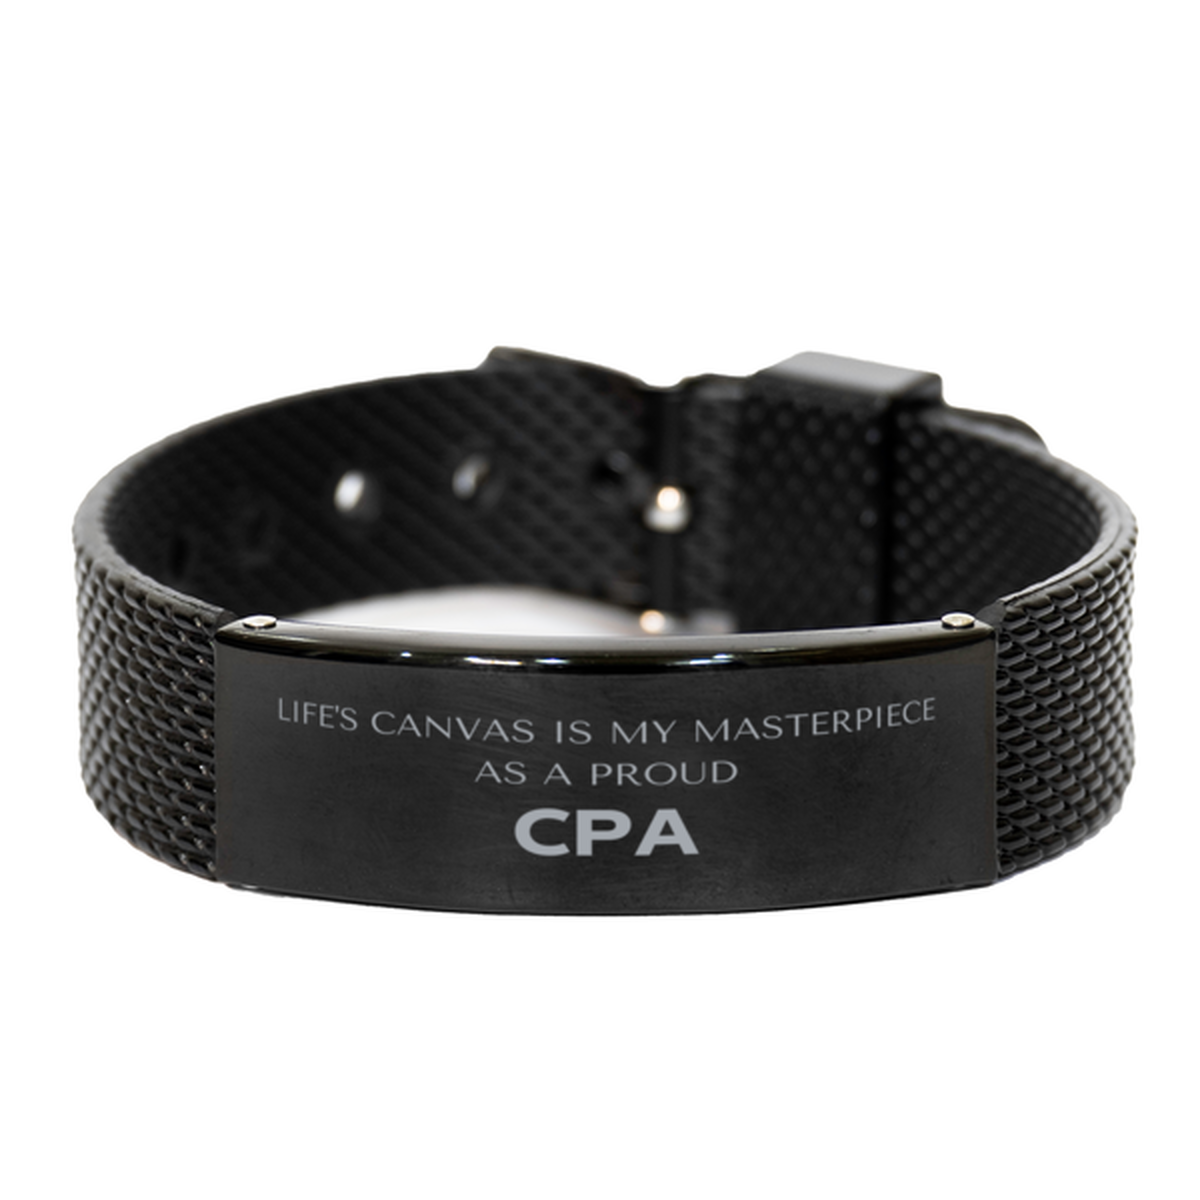 Proud CPA Gifts, Life's canvas is my masterpiece, Epic Birthday Christmas Unique Black Shark Mesh Bracelet For CPA, Coworkers, Men, Women, Friends